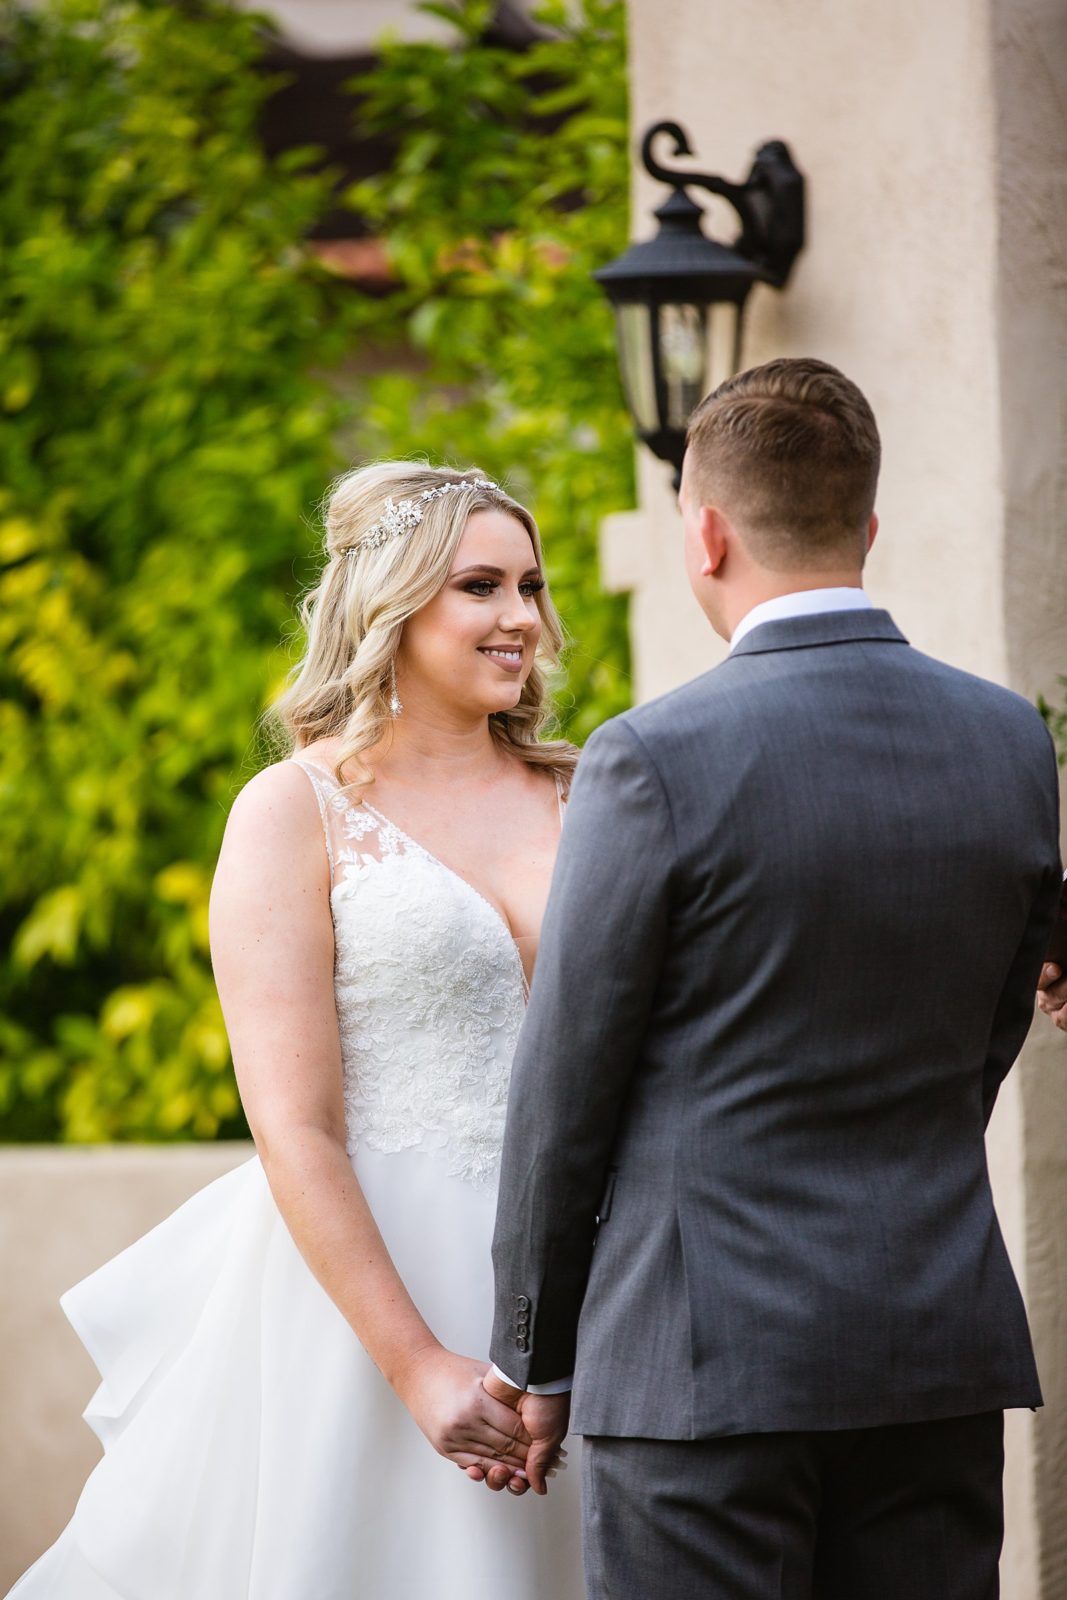 Bride looking at her groom during their wedding ceremony at The Scottsdale Resort at McCormick Ranch by Scottsdale wedding photographer PMA Photography.